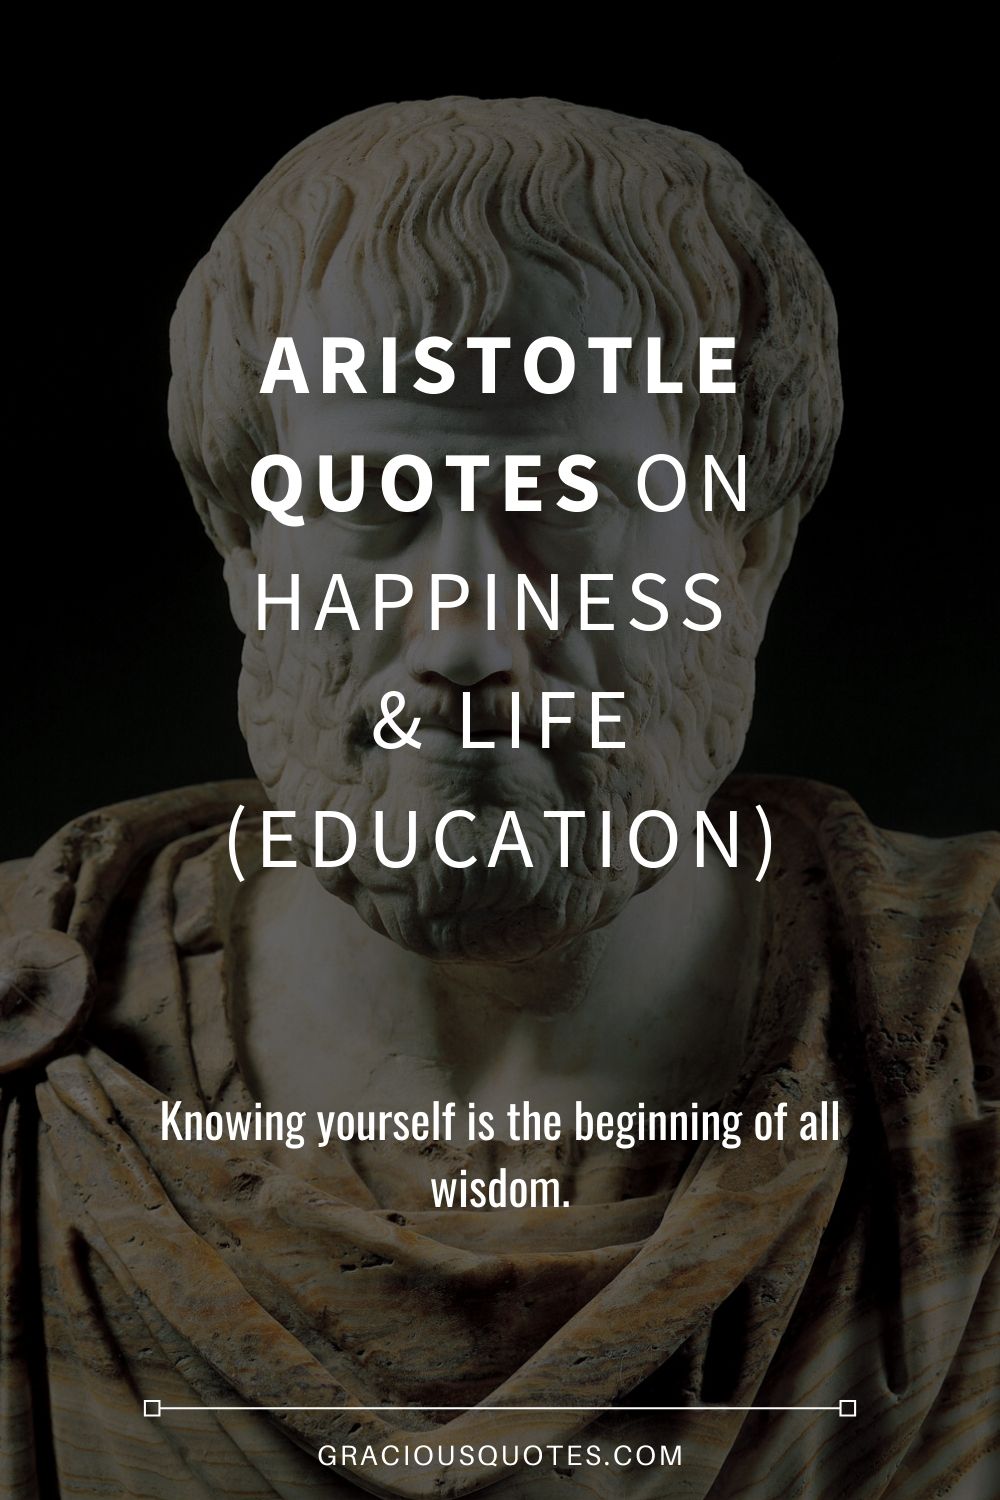 Aristotle Quotes on Happiness & Life (EDUCATION) - Gracious Quotes